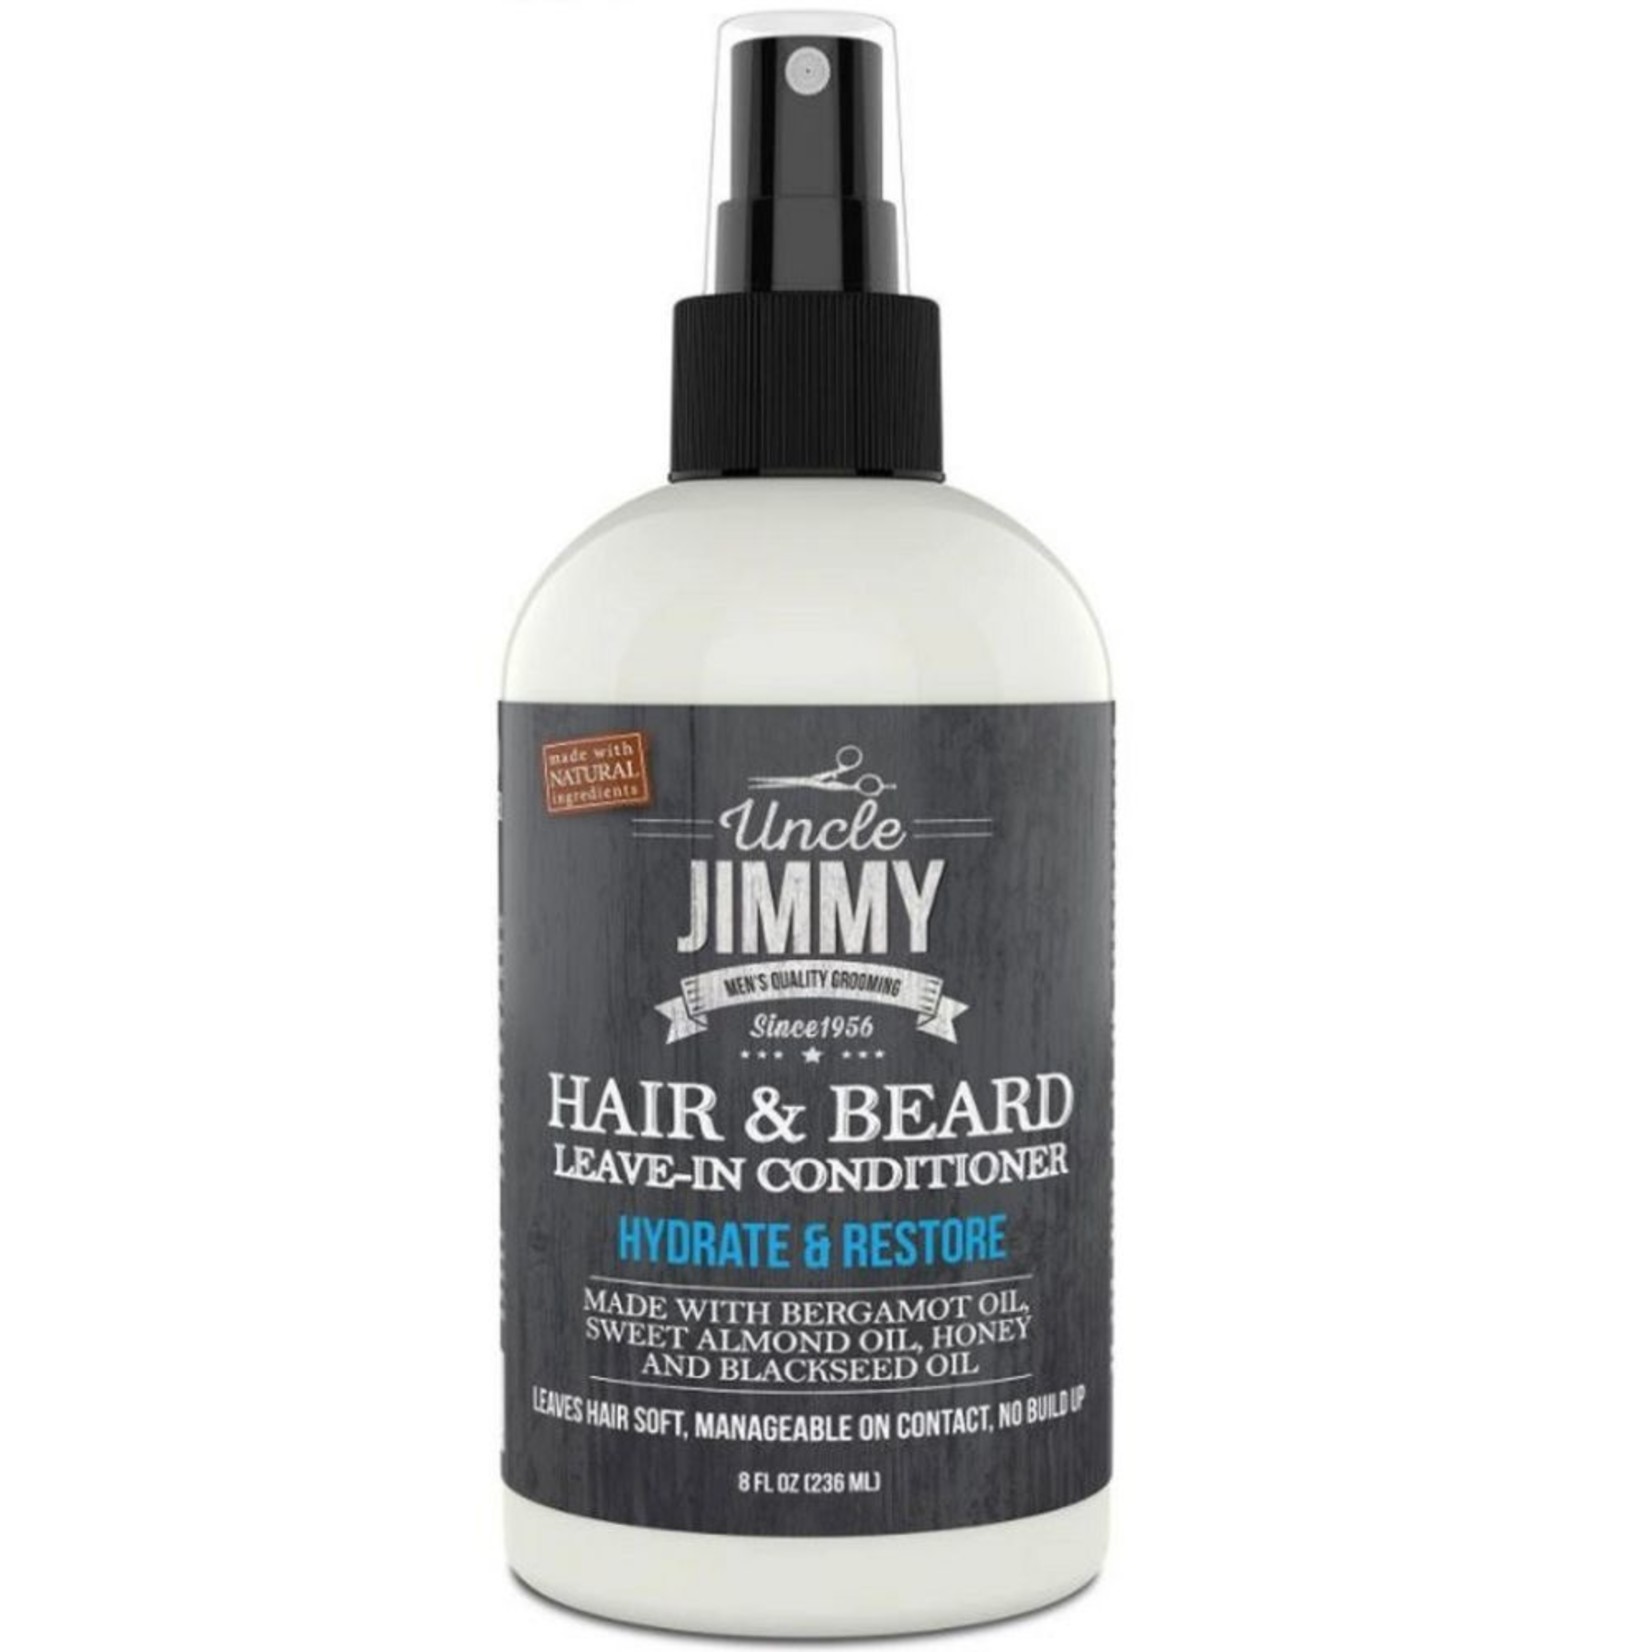 Uncle Jimmy Hair & Beard Leave In Conditioner